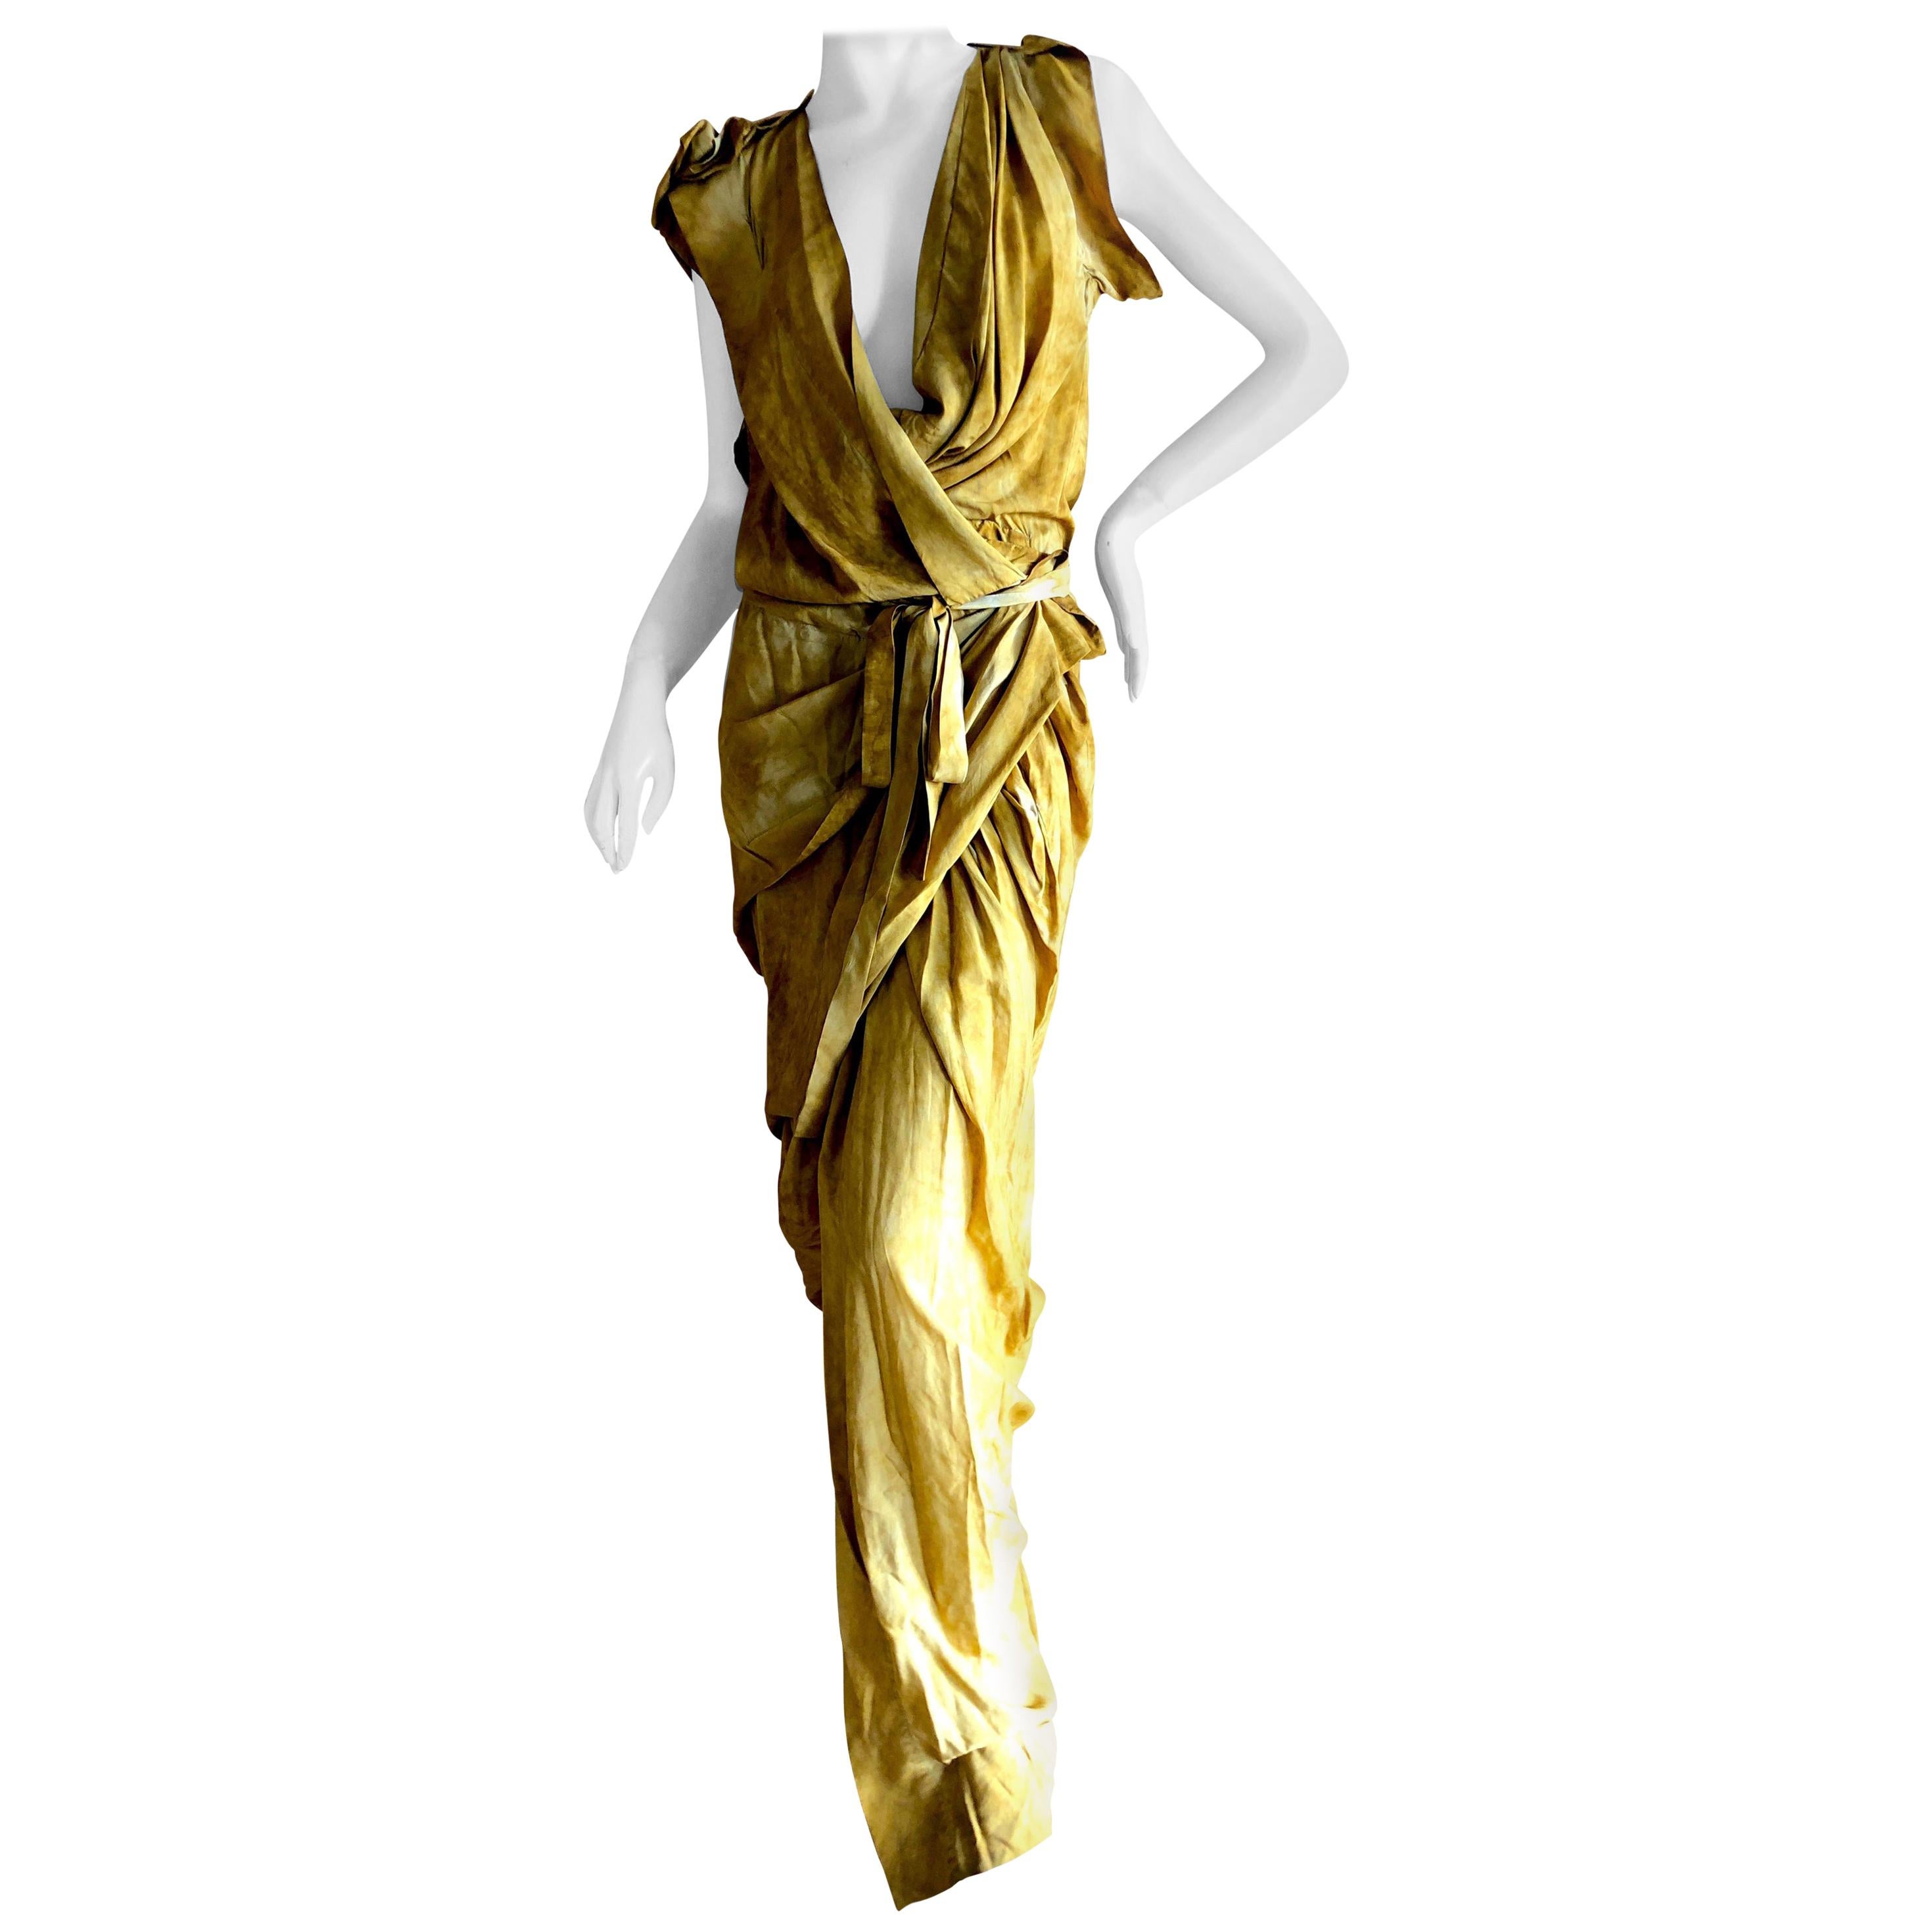 Vivienne Westwood 2012 Gold Label Draped Goddess Dress New with Tags